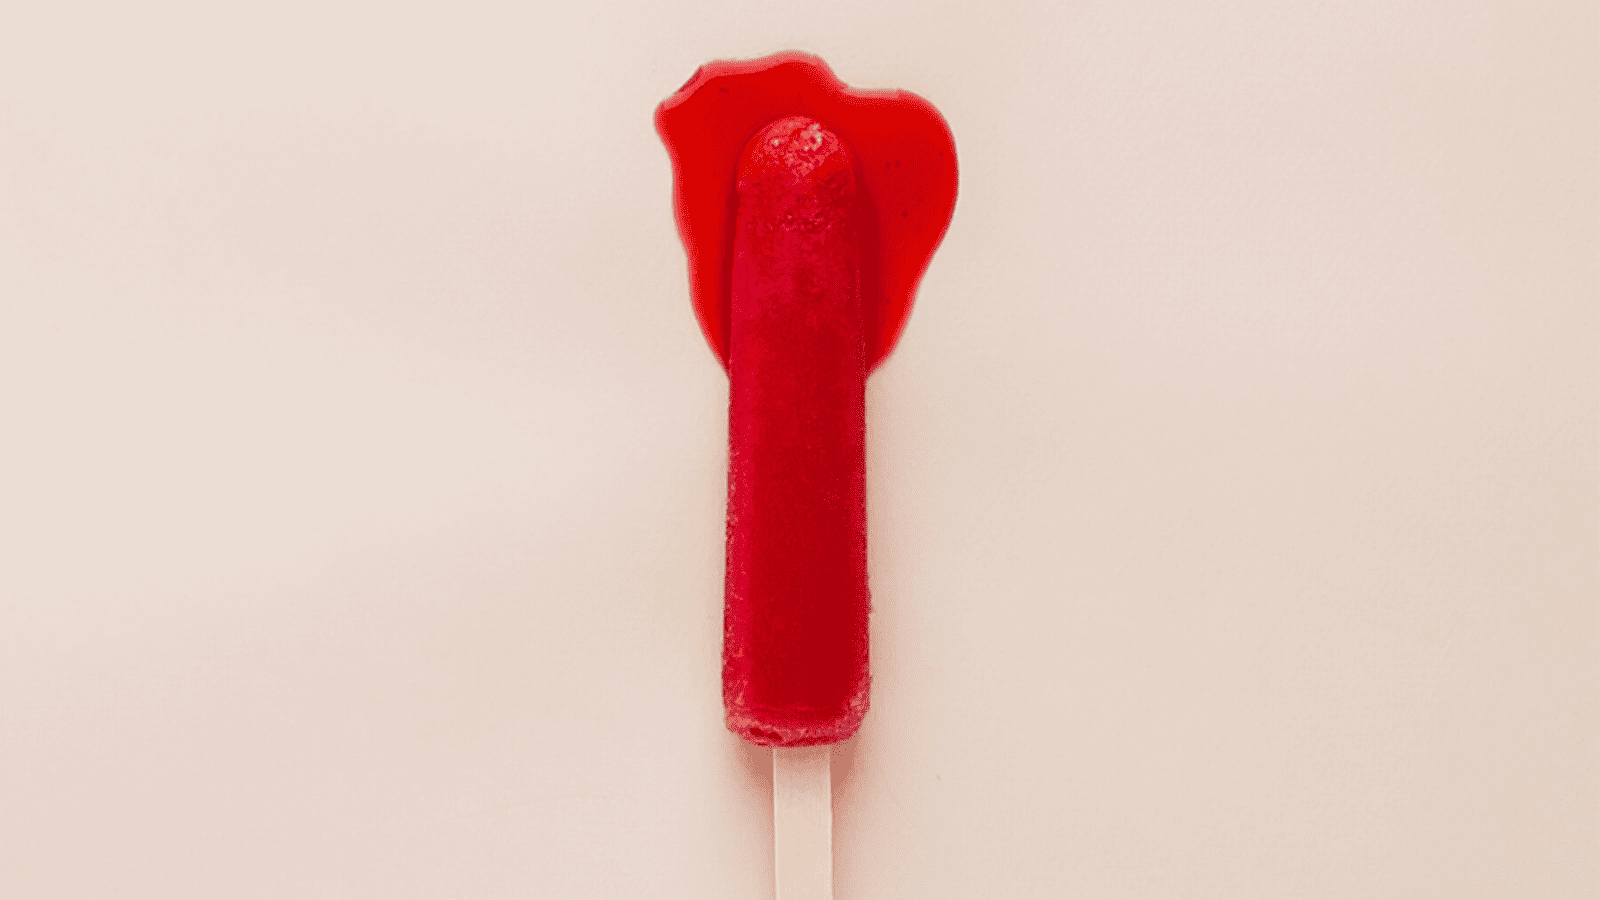 A melted blood red popsicle